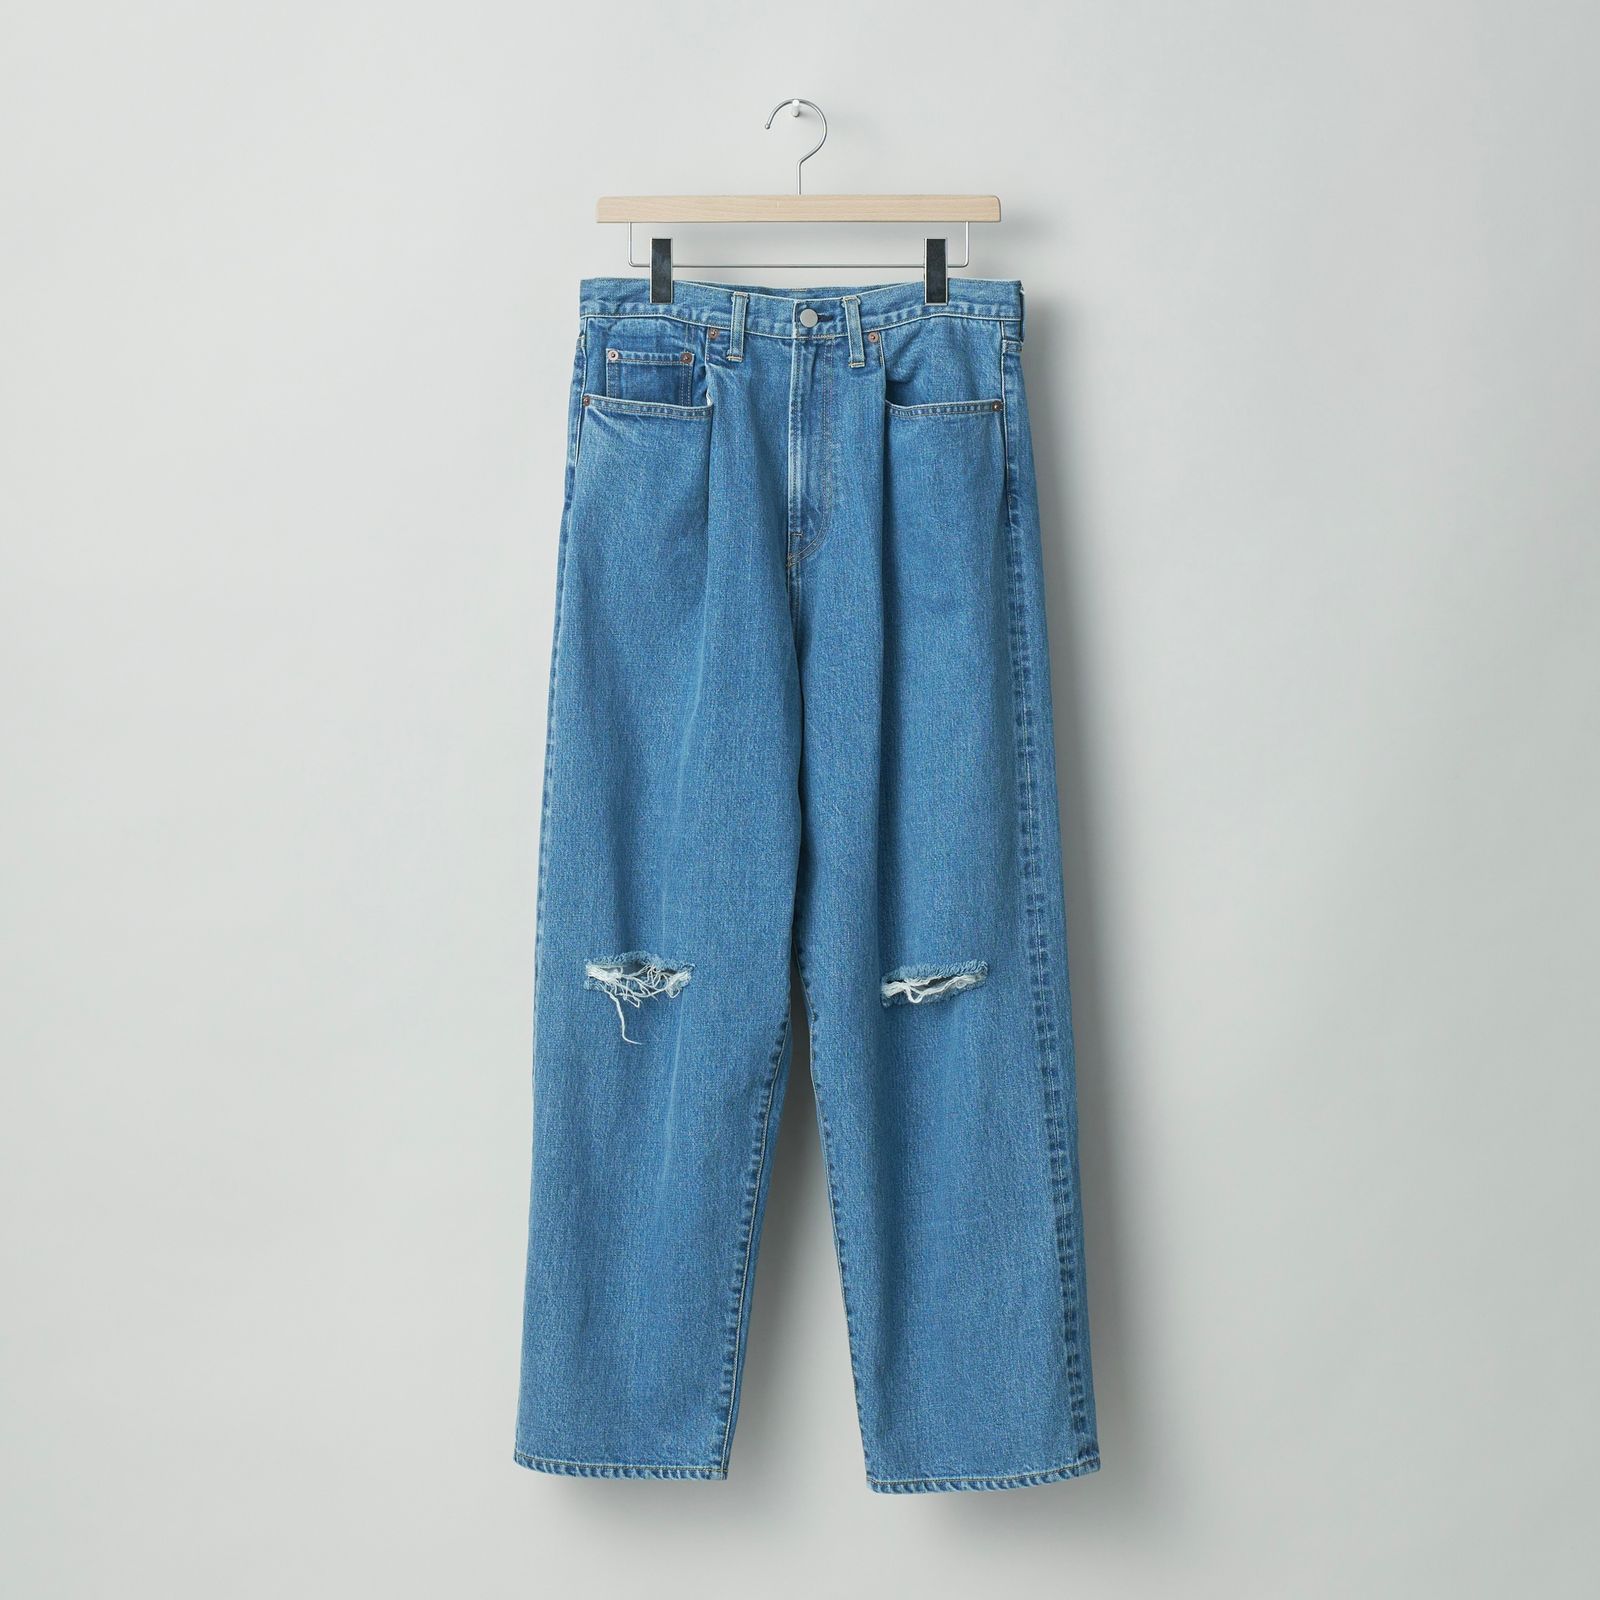 stein - 【残りわずか】Vintage Reproduction Damage Wide Denim Jeans